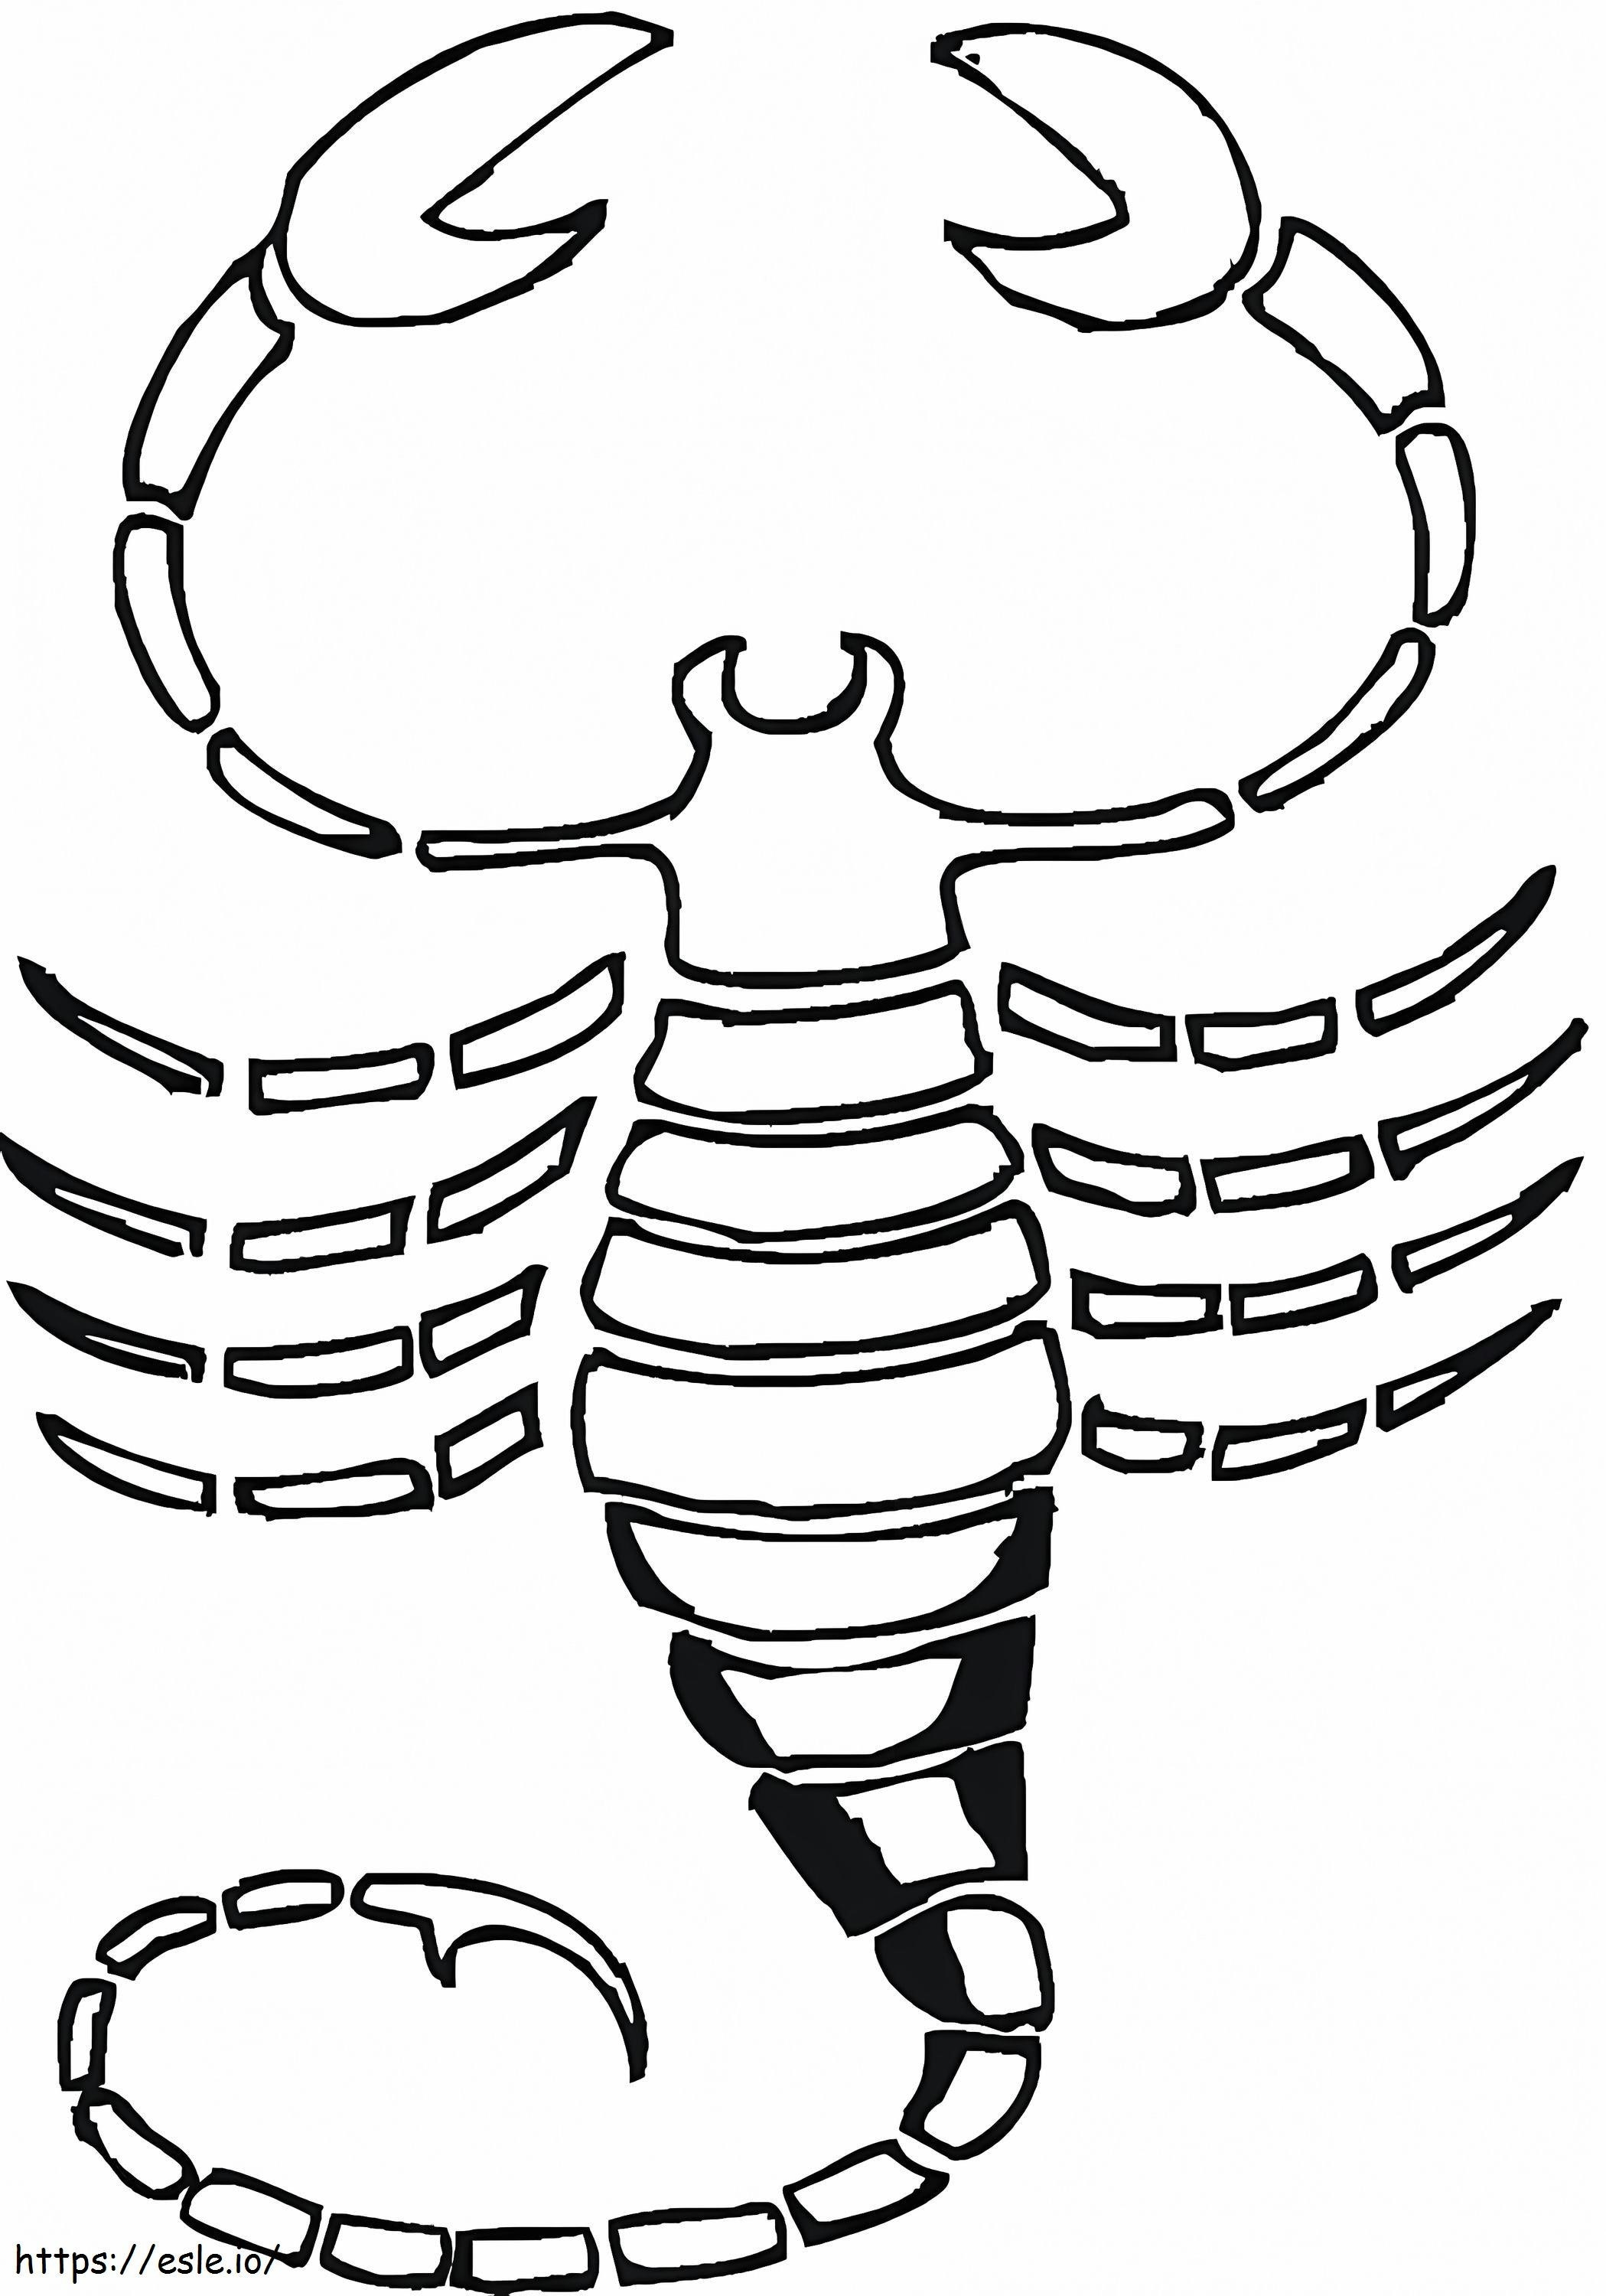 Scorpion 5 coloring page